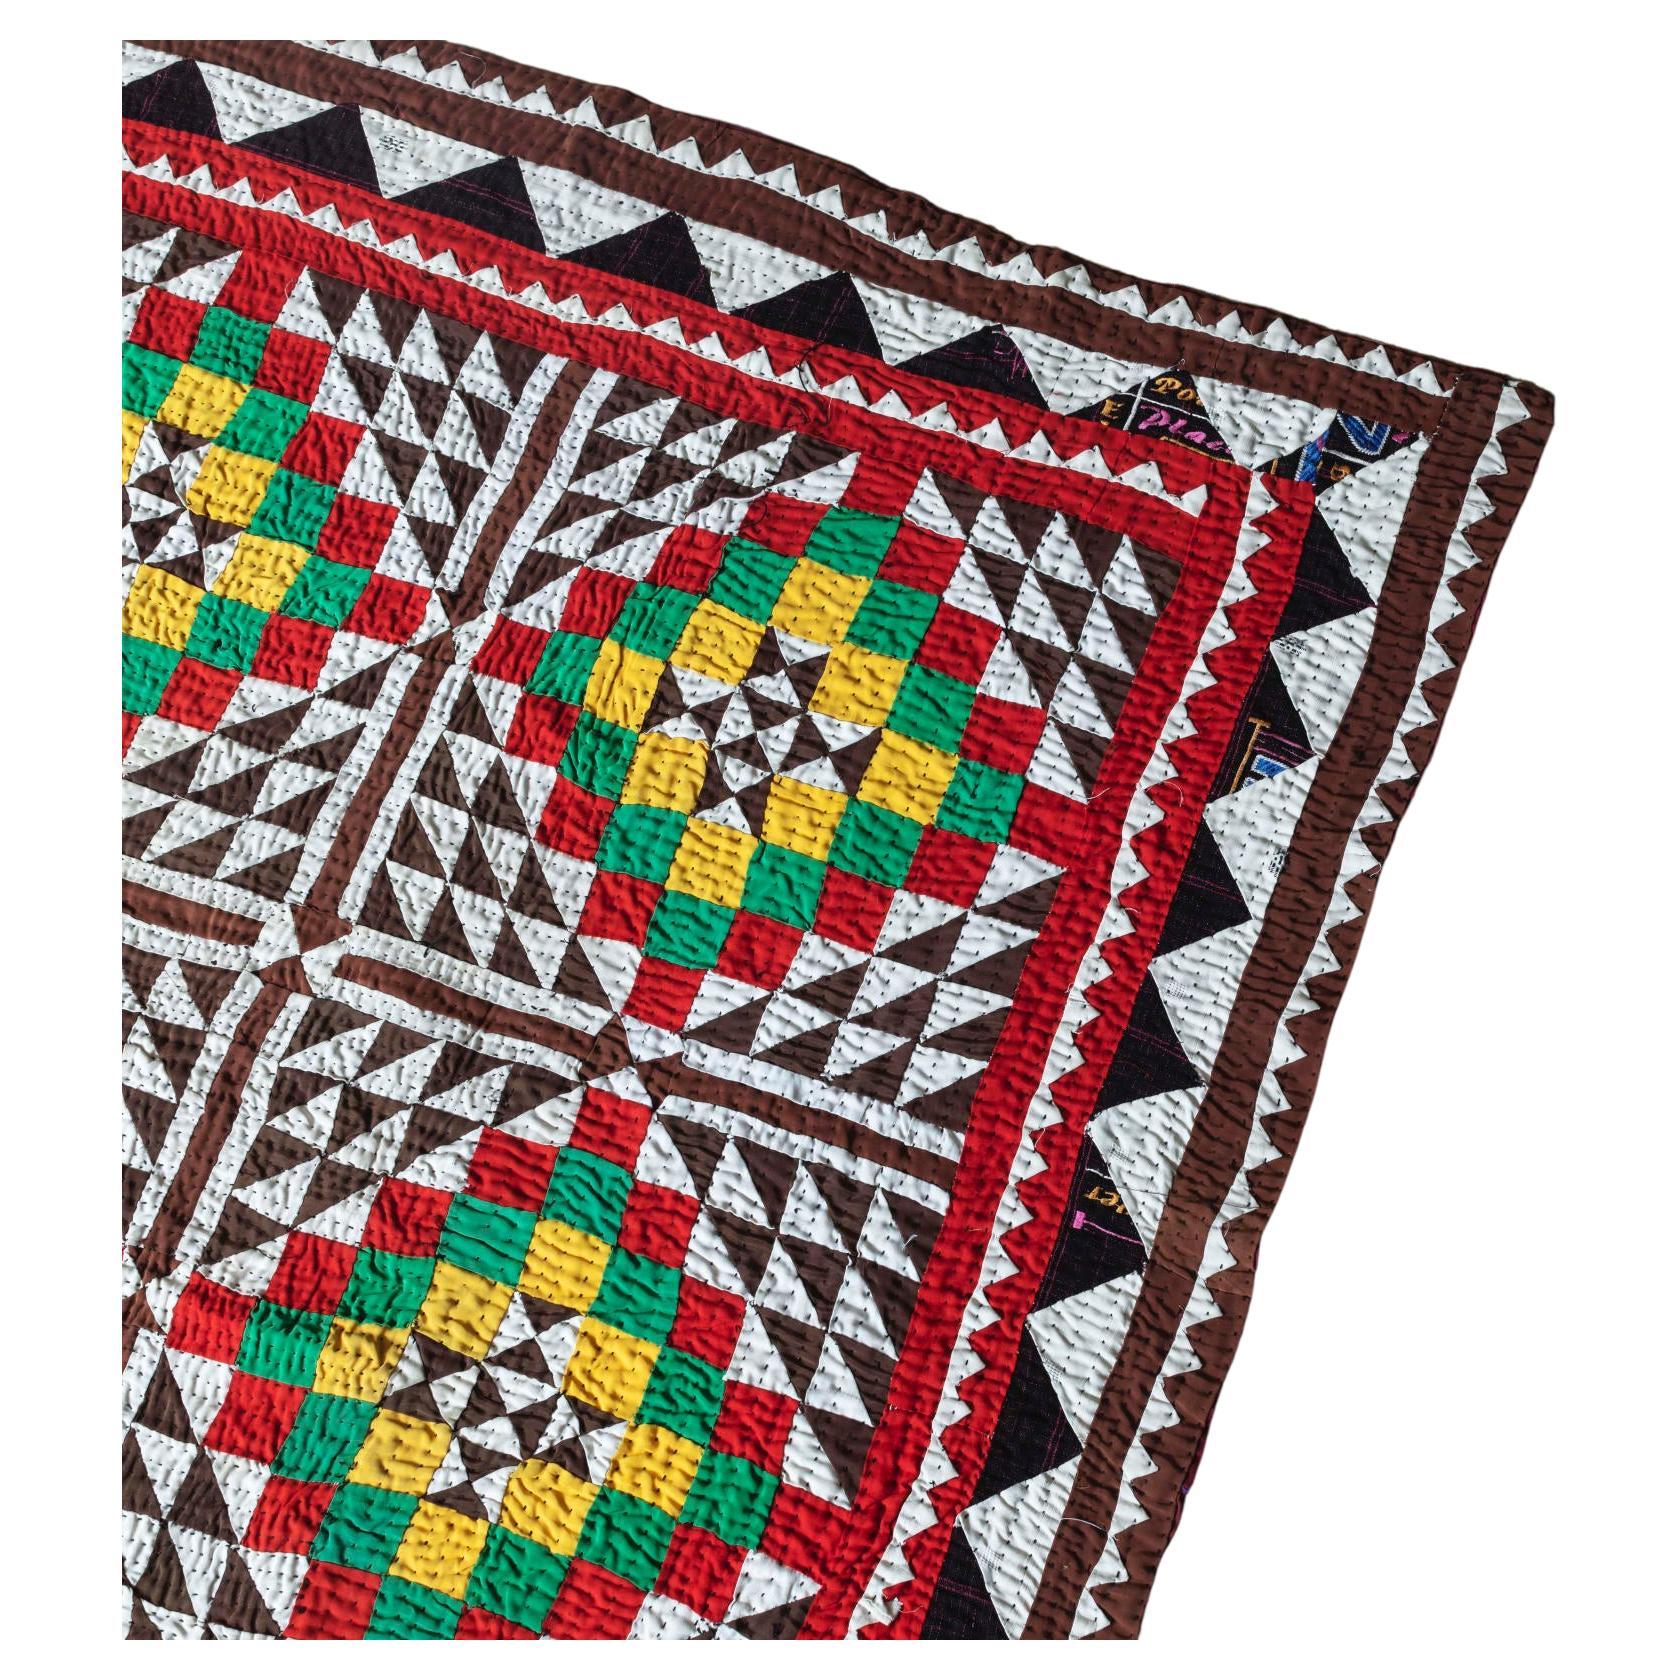 North Indian Quilt For Sale